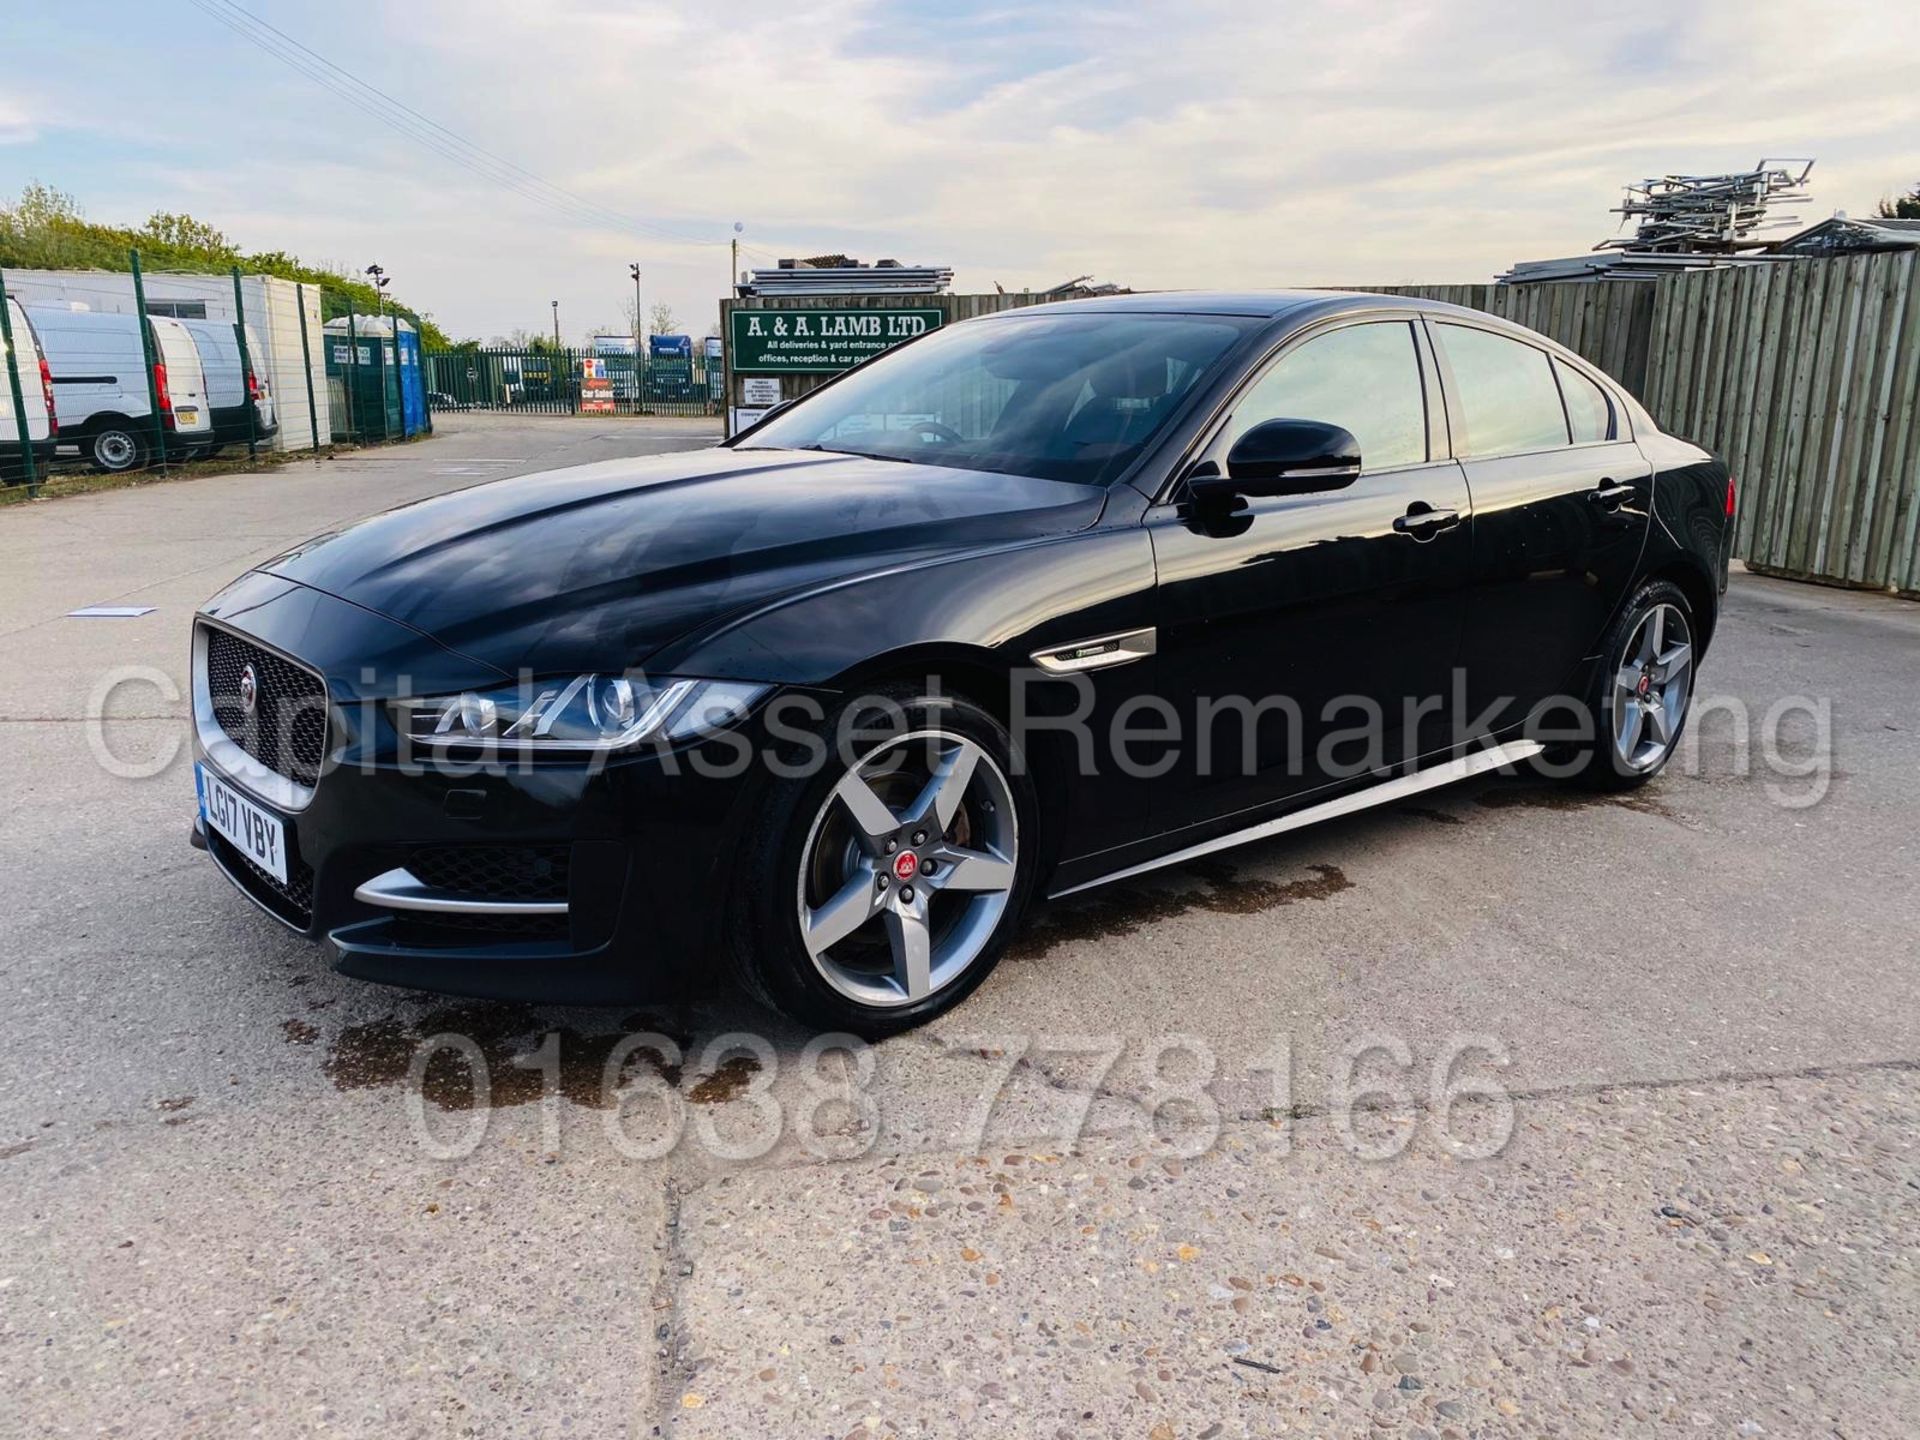 (On Sale) JAGUAR XE *R-SPORT* SALOON 2.0D 180 BHP (2017- EURO 6) 1 OWNER - FULL SERVICE HISTORY - Image 7 of 46